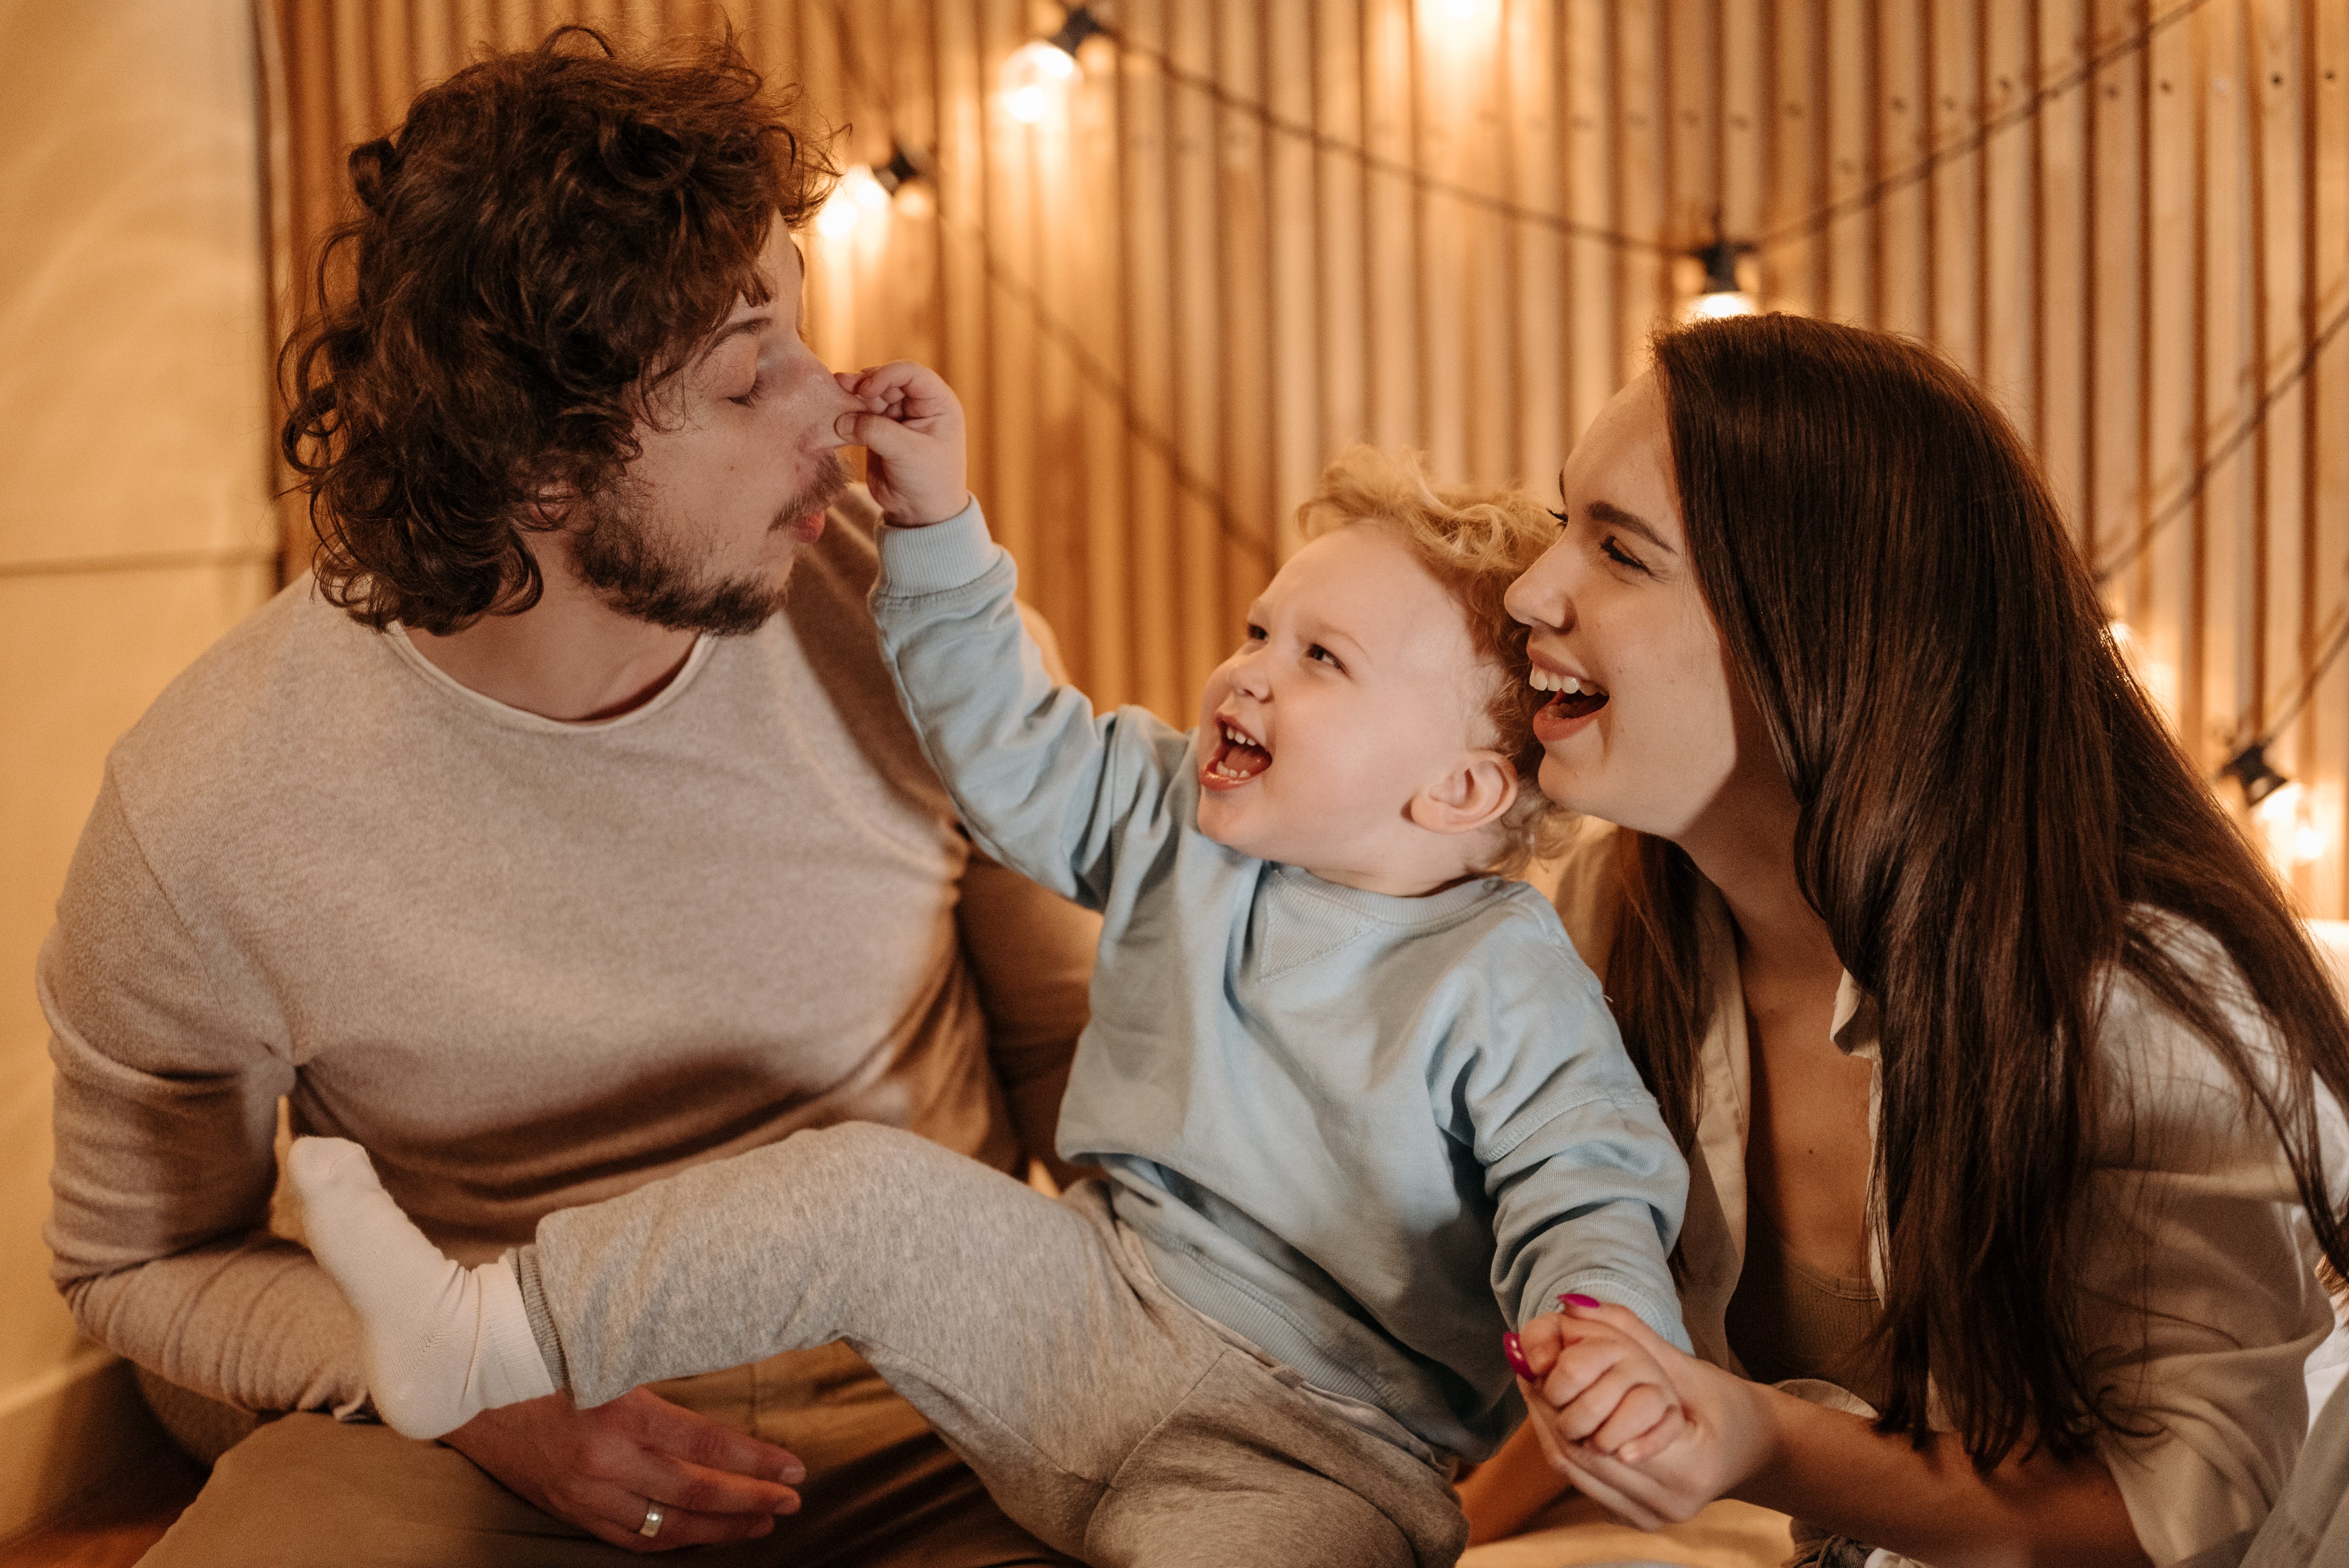 A couple playing with their child | Source: Pexels